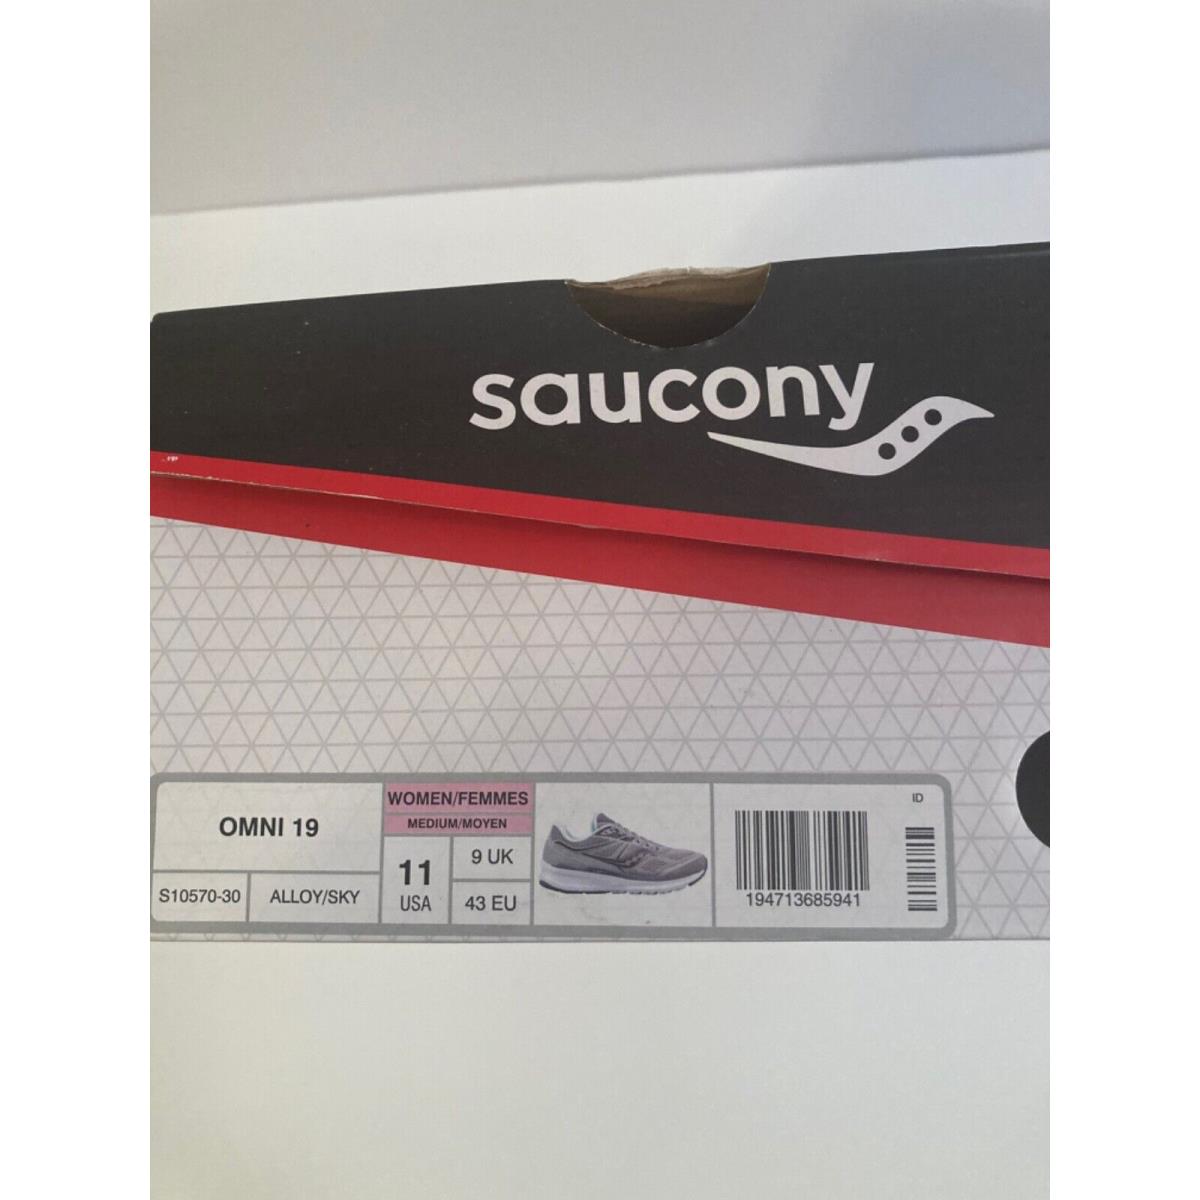 Saucony shoes Omni - grey and mint green 4